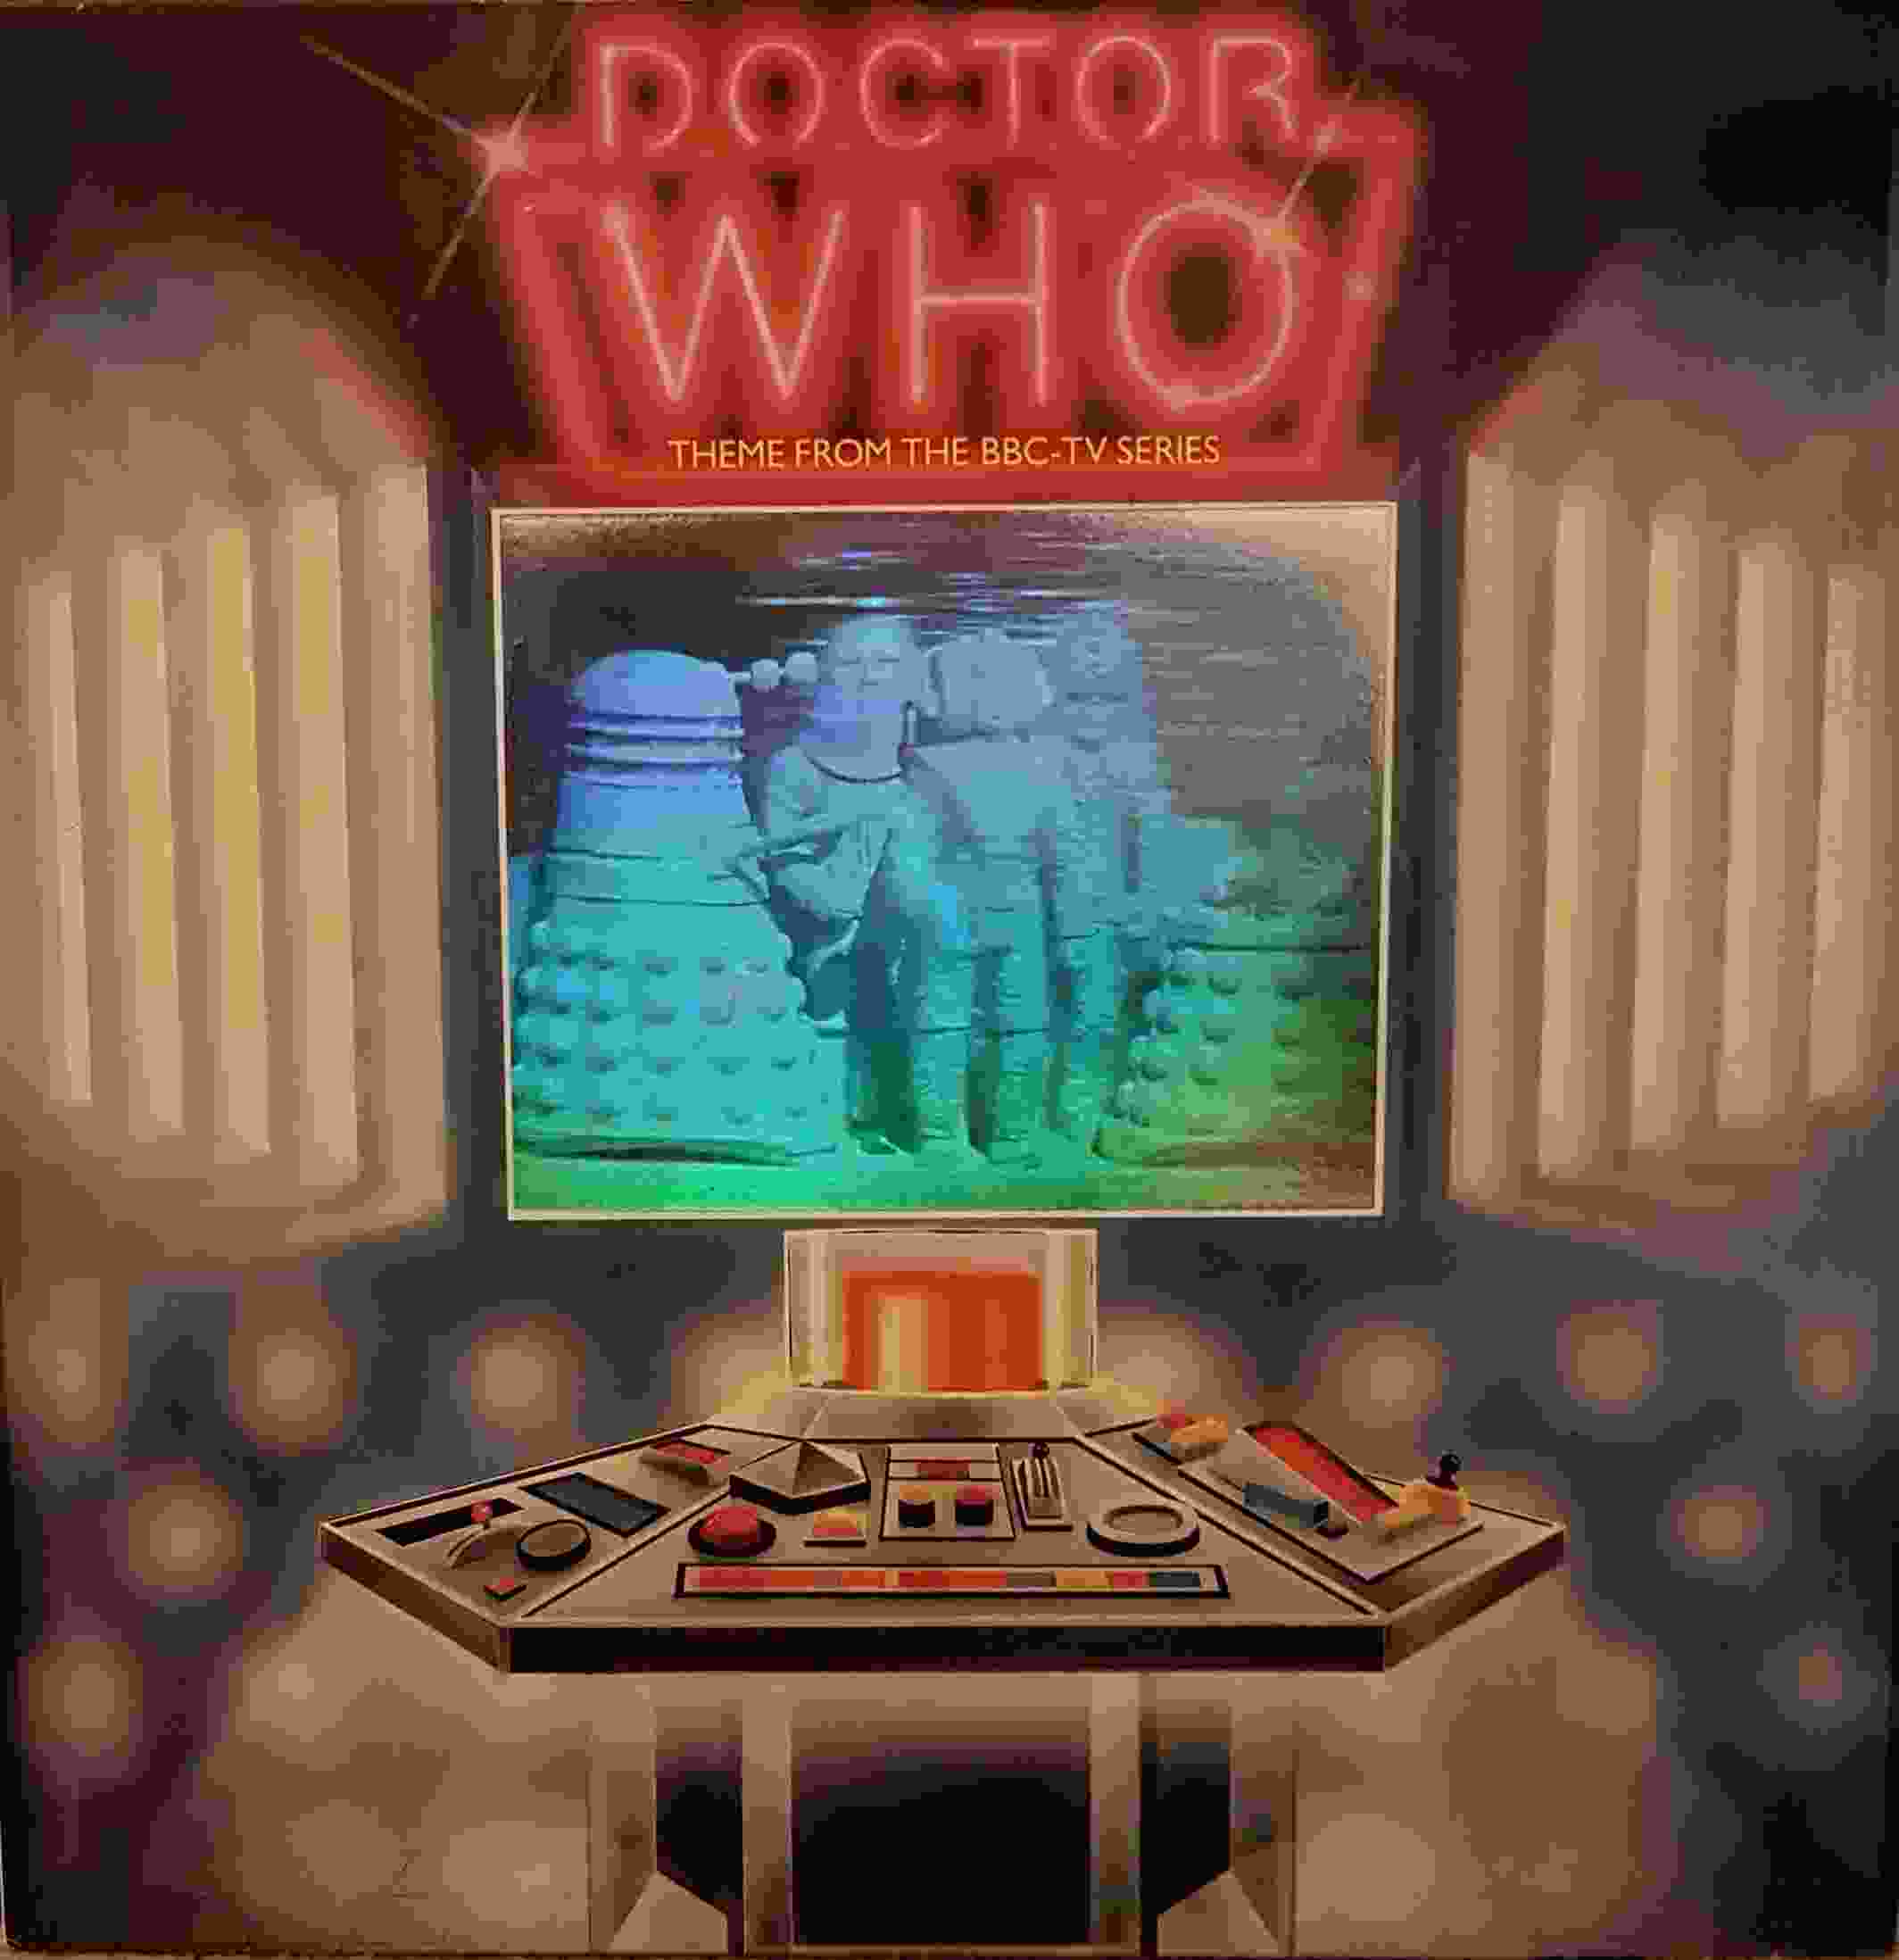 Picture of ZRXL 193 Doctor who - Hologram cover limited edition by artist Ron Grainer / Dominic Glynn / Mankind from the BBC cassingles - Records and Tapes library